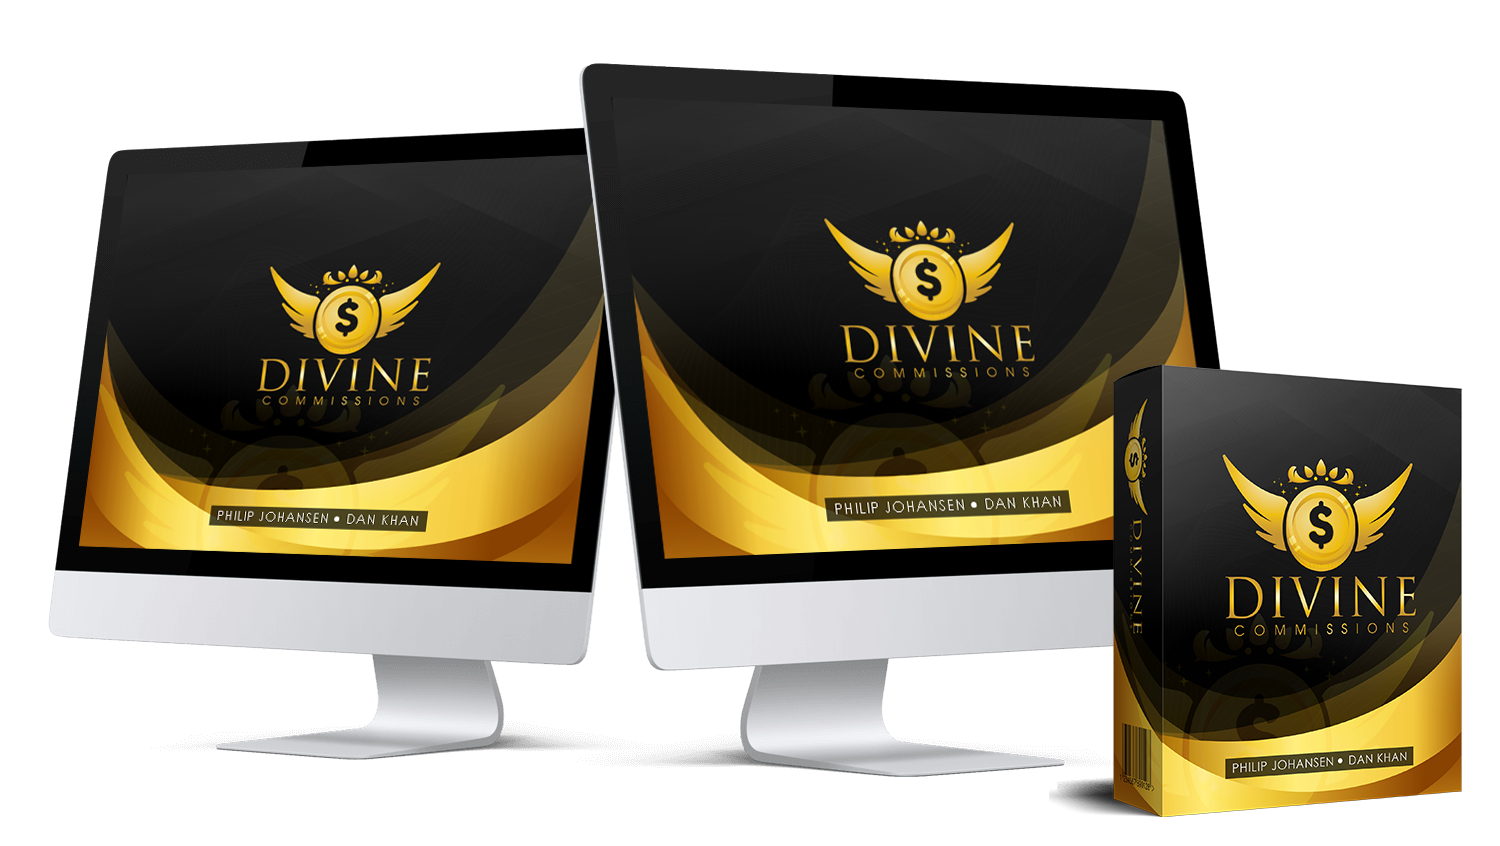 divine commissions review